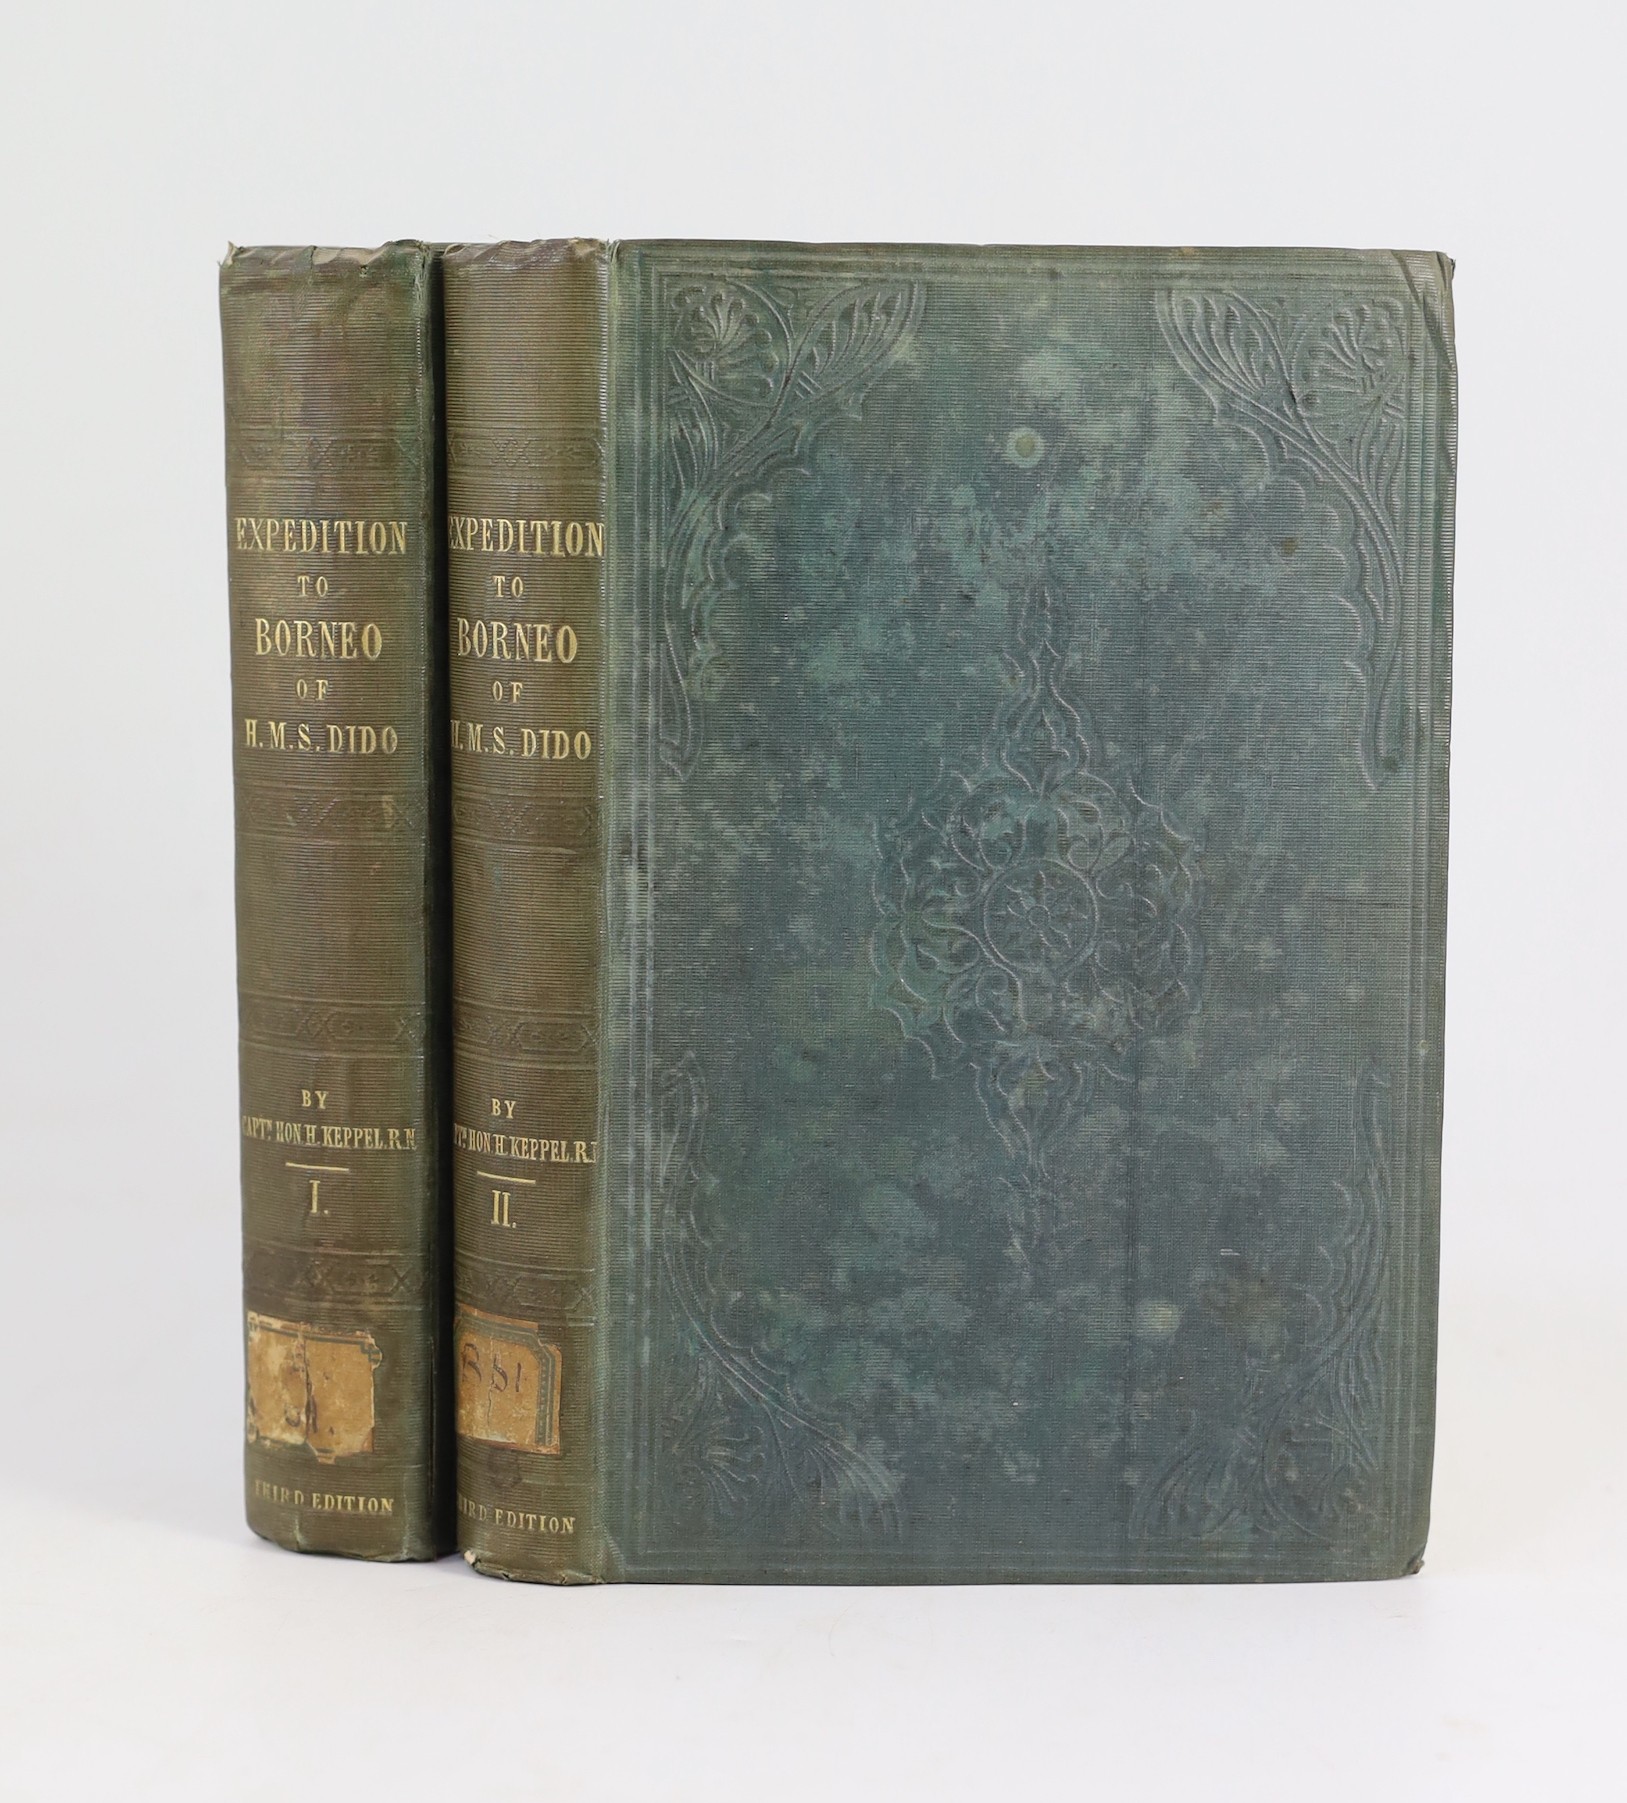 Keppel, Henry,Sir - The Expedition to Borneo of H.M.S Dido, 3rd edition, 2 vols, 8vo, original cloth, with 2 frontises, 8 plates and 6 folded maps, pencil fly leaf inscribed ‘’This copy belonged to Admiral C.B. Bonham [1